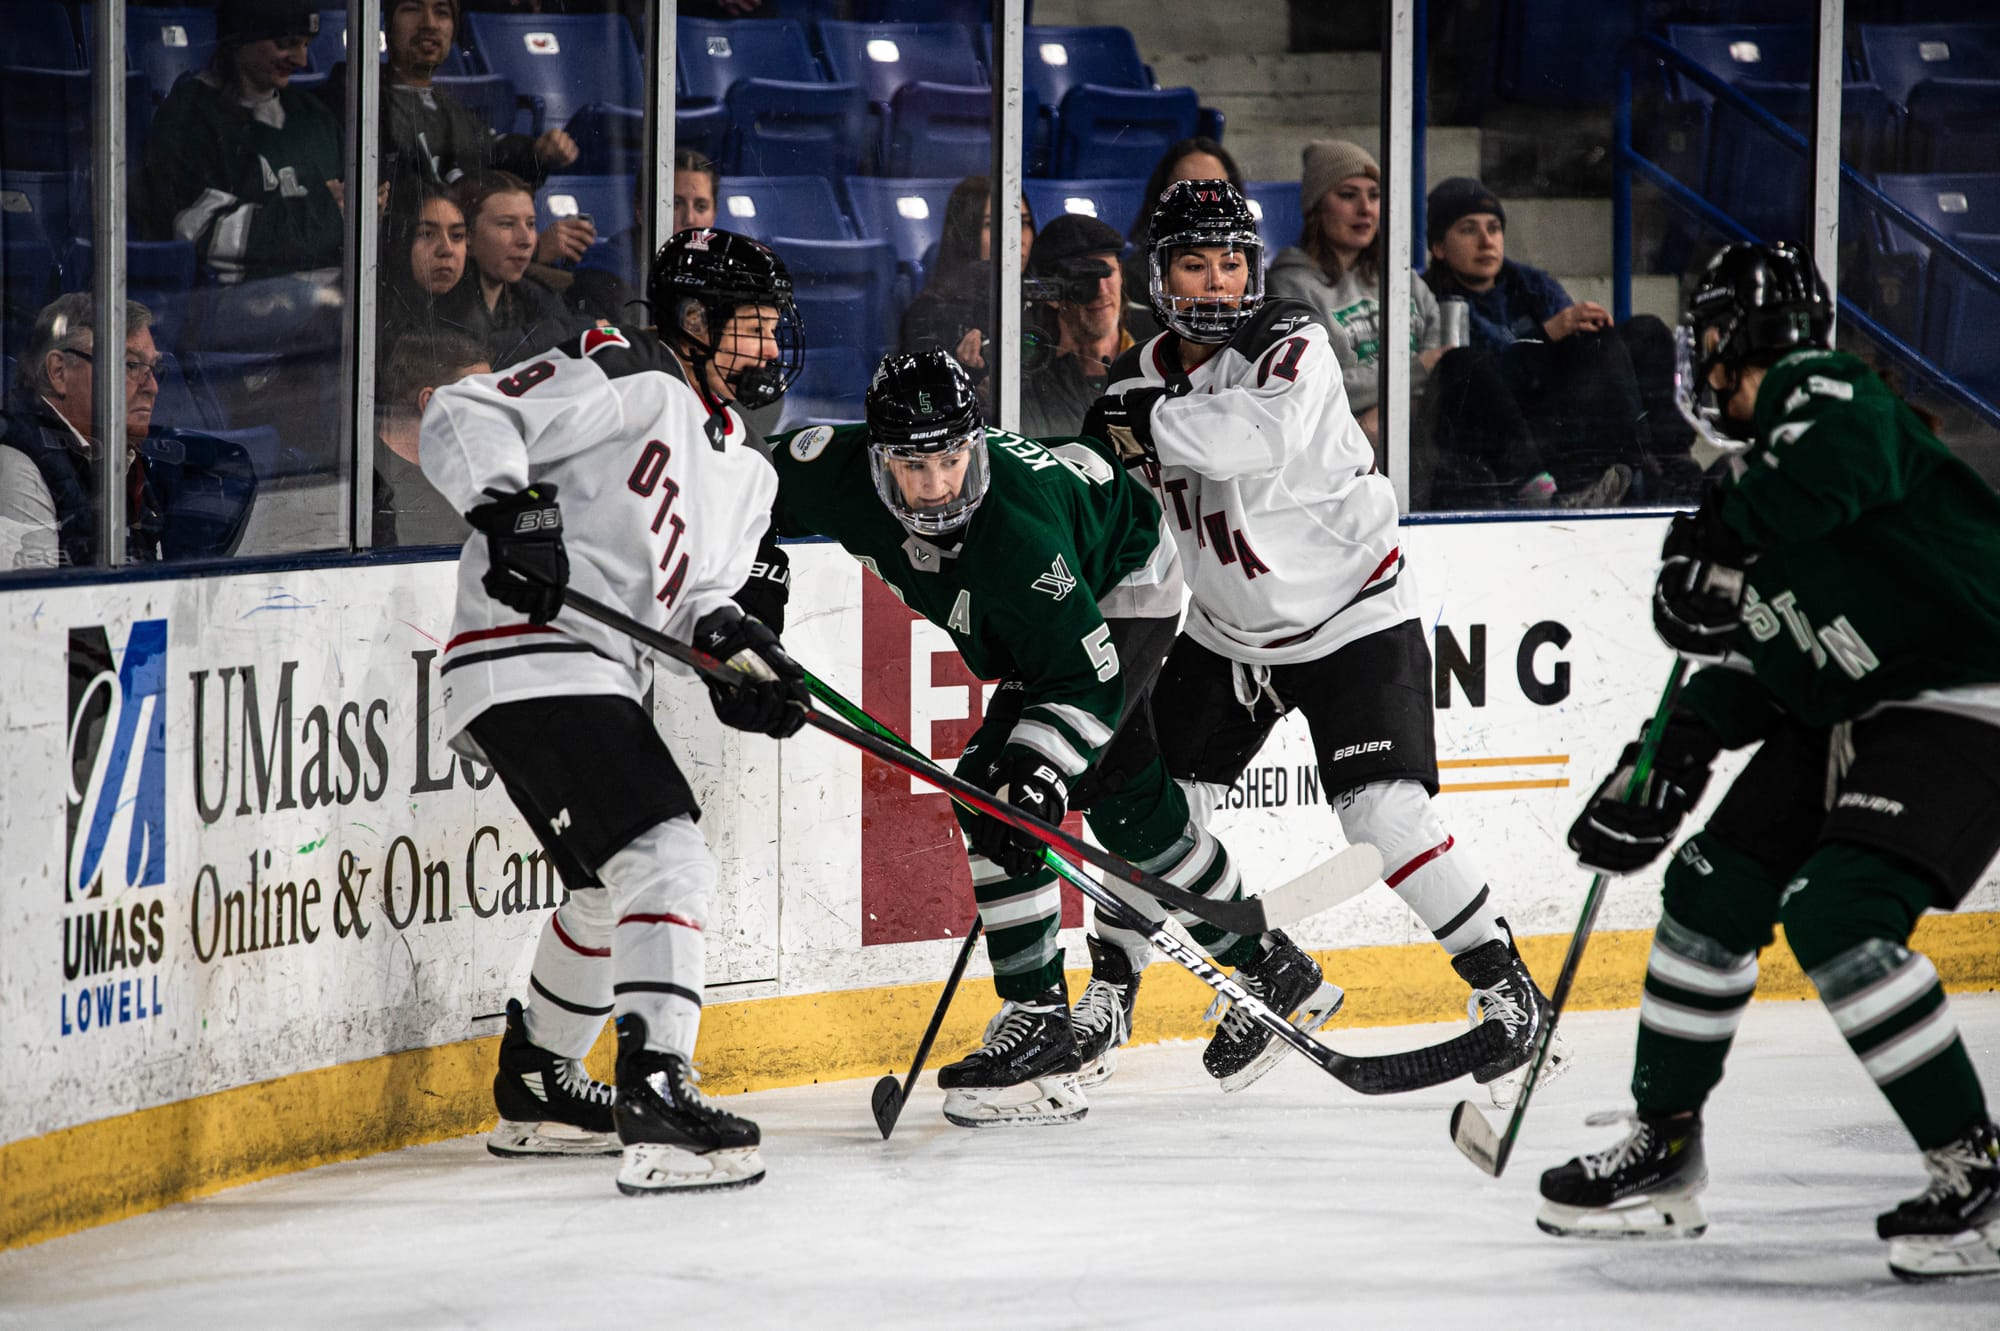 Megan Keller fends off two Ottawa players in the corner. Keller is in the middle, hunche over, while the Ottawa players are upright. Keller is wearing her green home uniform, while Ottawa is in white.